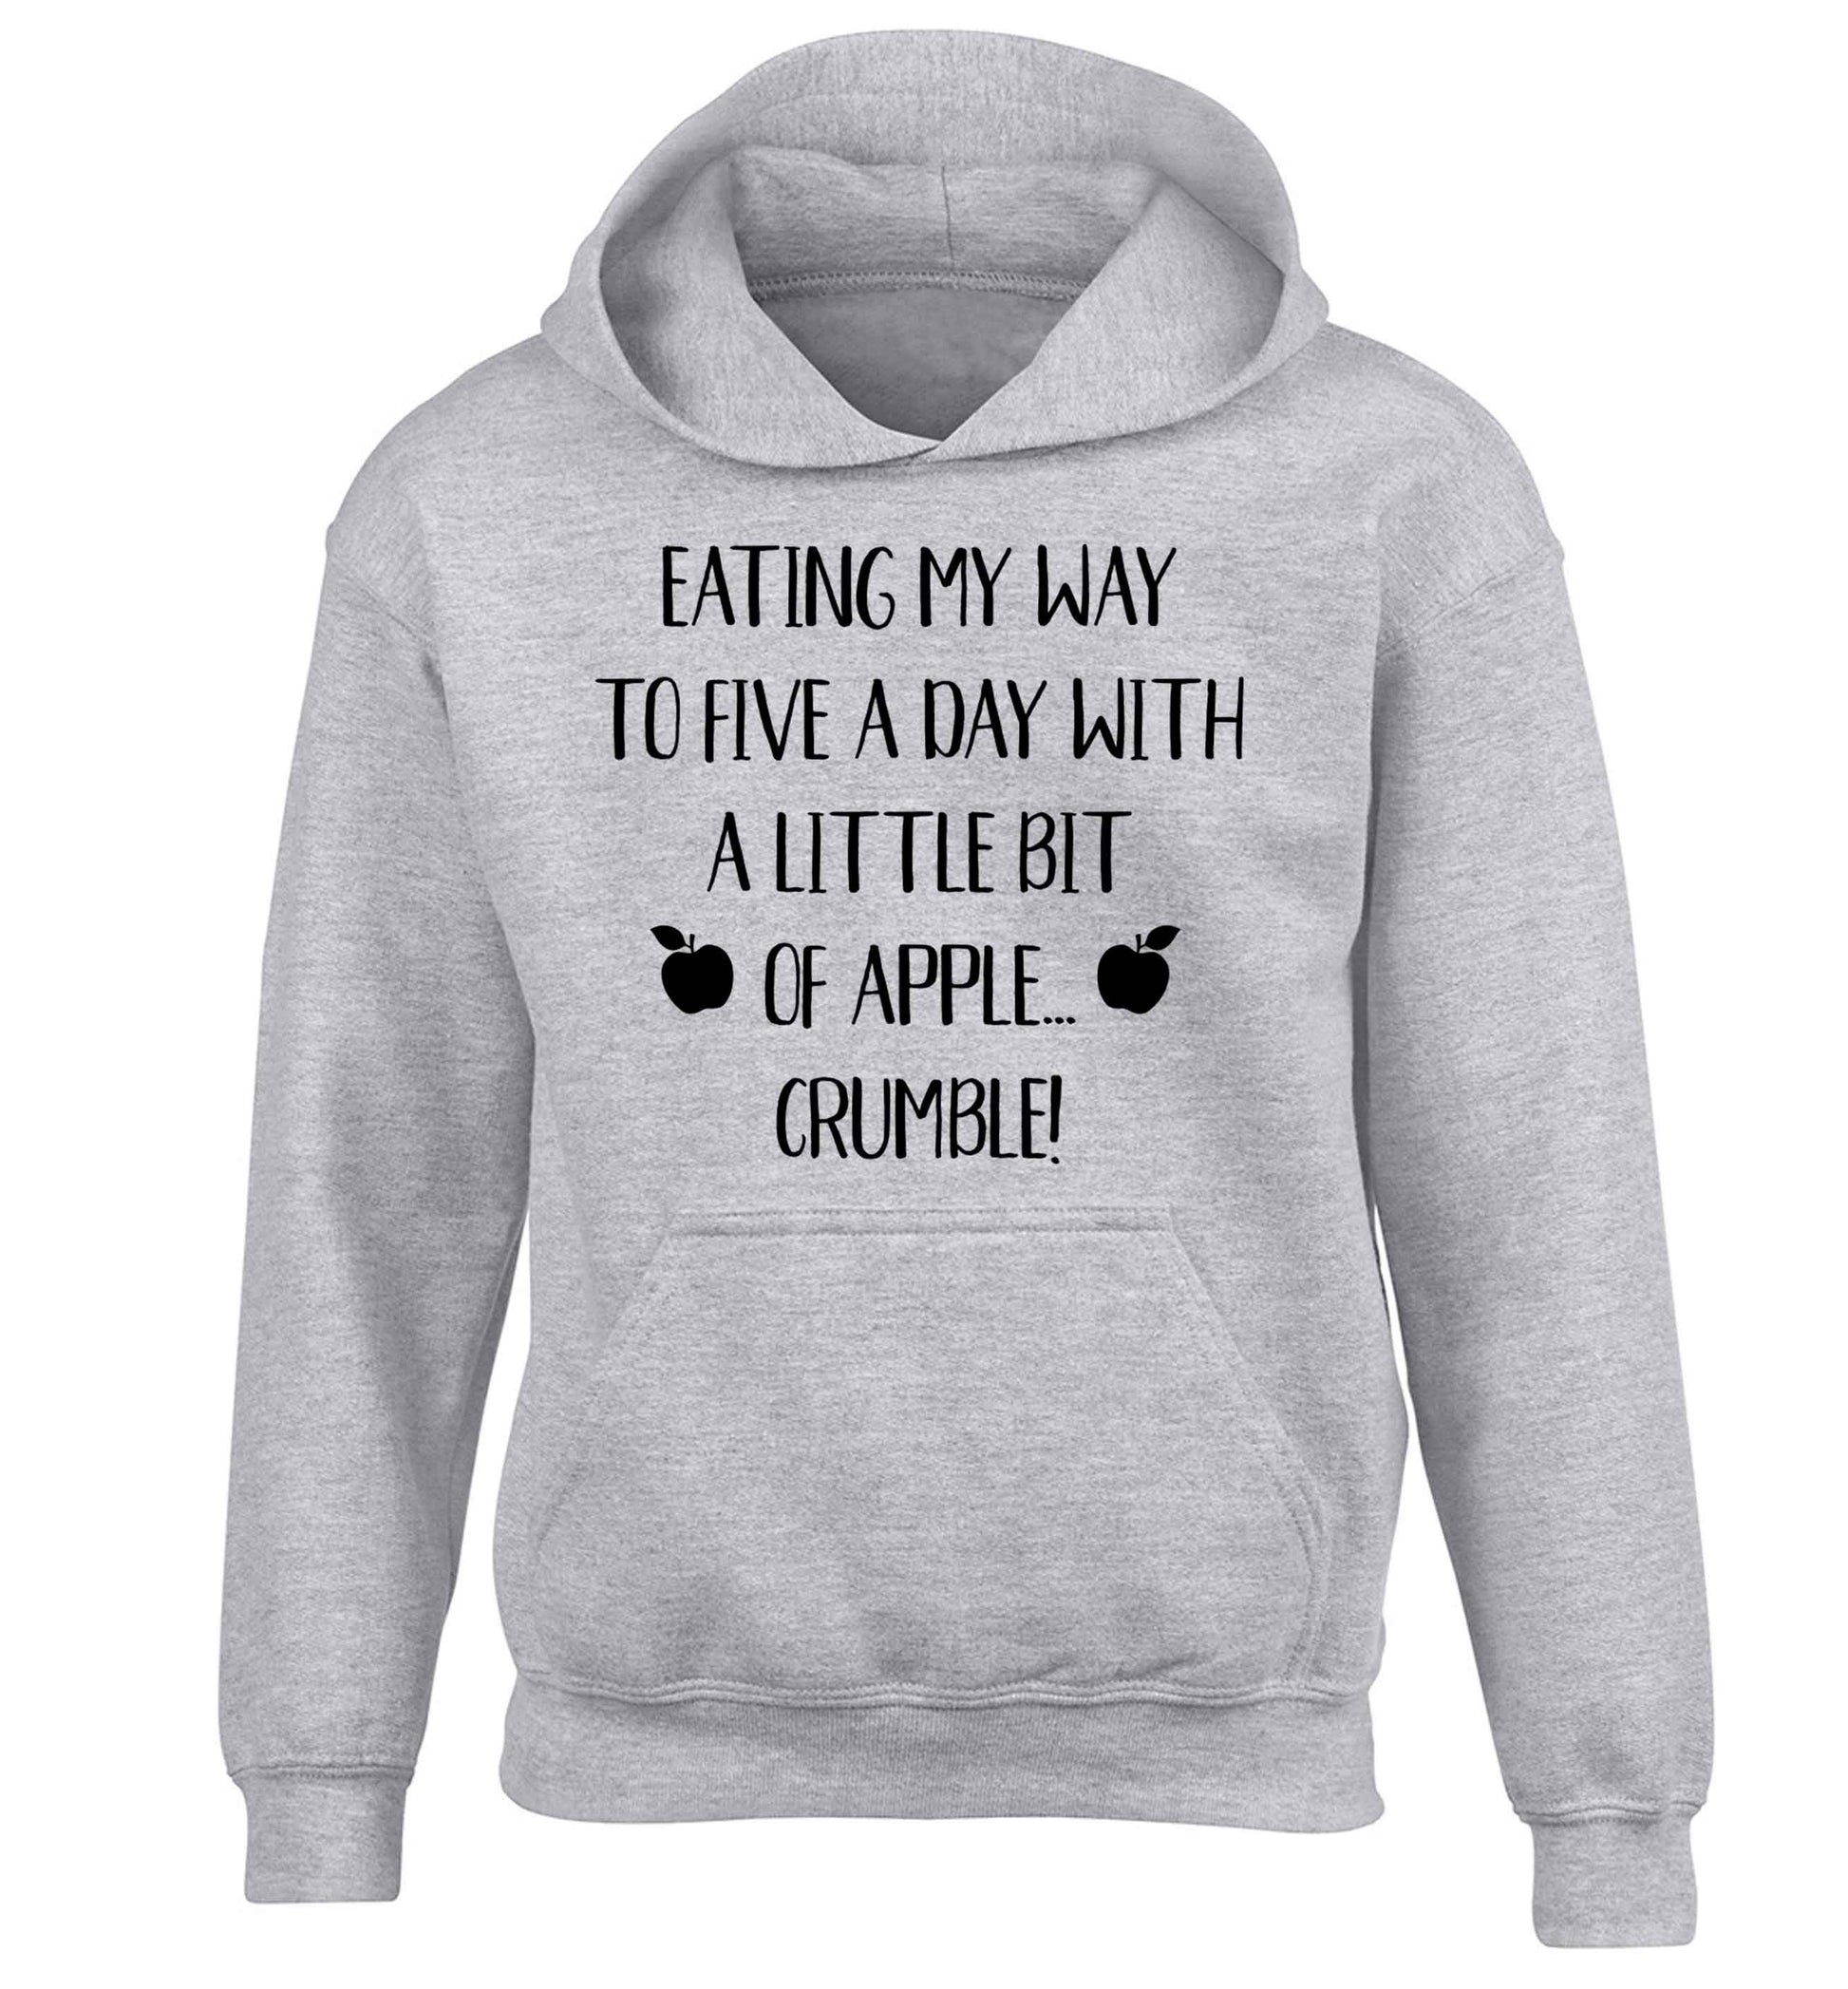 Eating my way to five a day with a little bit of apple crumble children's grey hoodie 12-13 Years